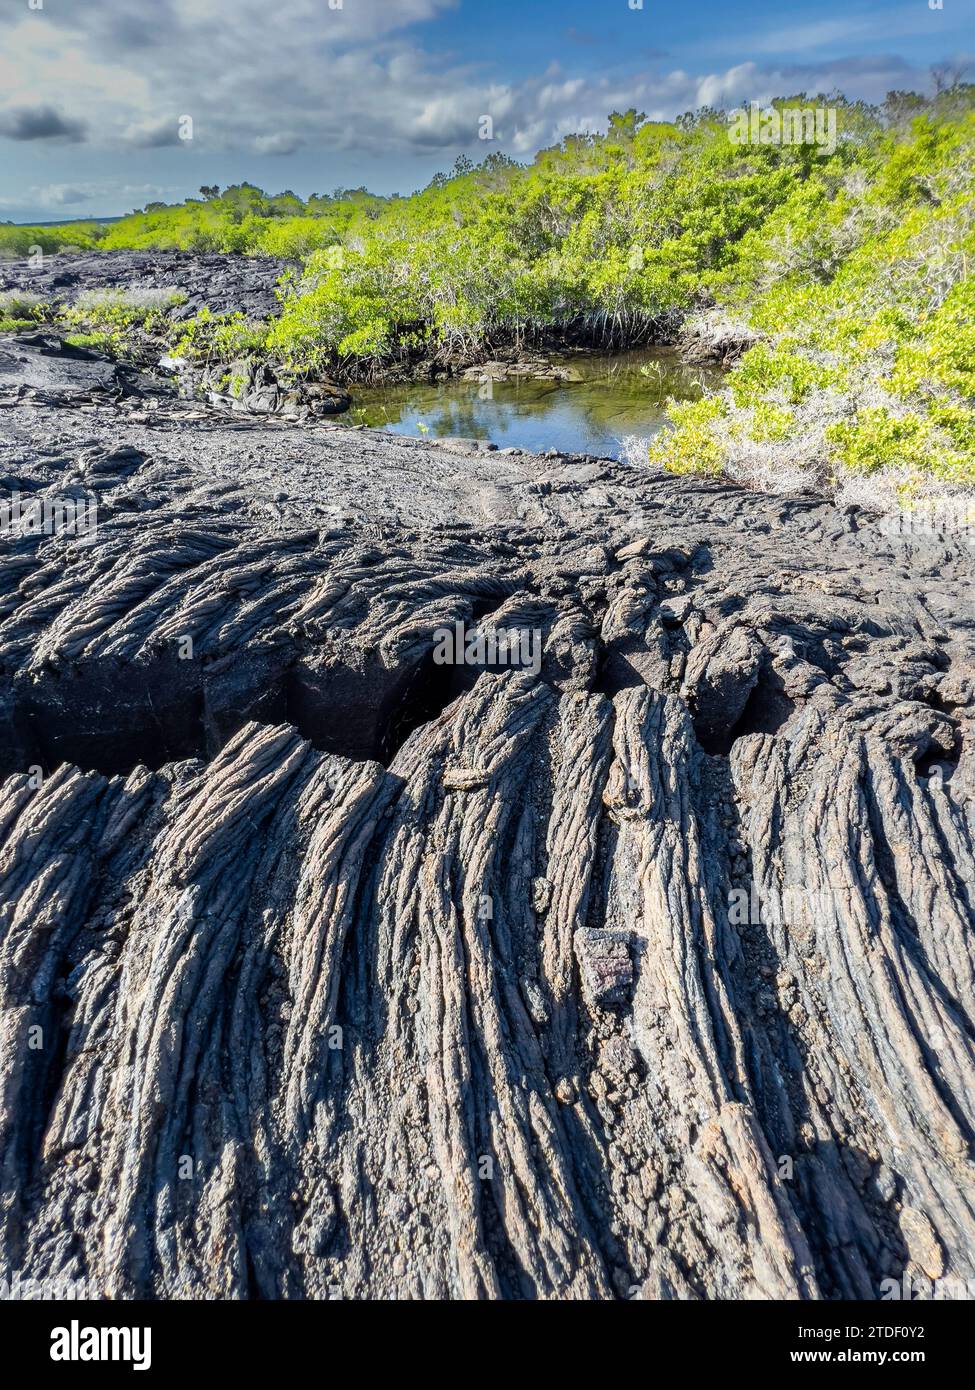 Pahoehoe lava on the youngest island in the Galapagos, Fernandina Island, Galapagos Islands, UNESCO World Heritage Site, Ecuador, South America Stock Photo